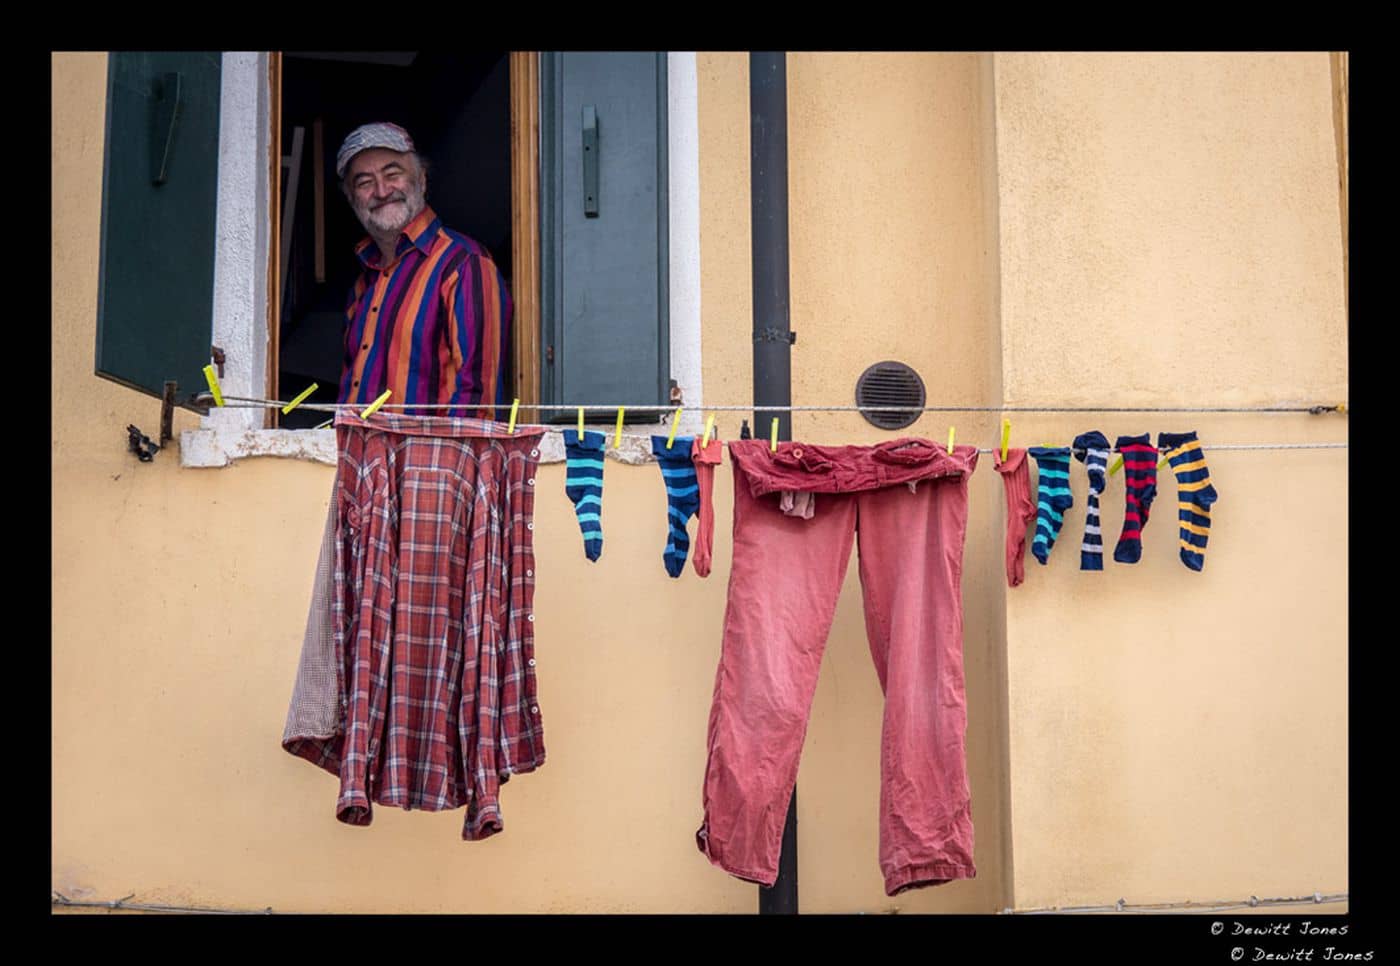 Image: Man smiles out of an open window with laundry hanging on the line in front of him taken by Dewitt Jones